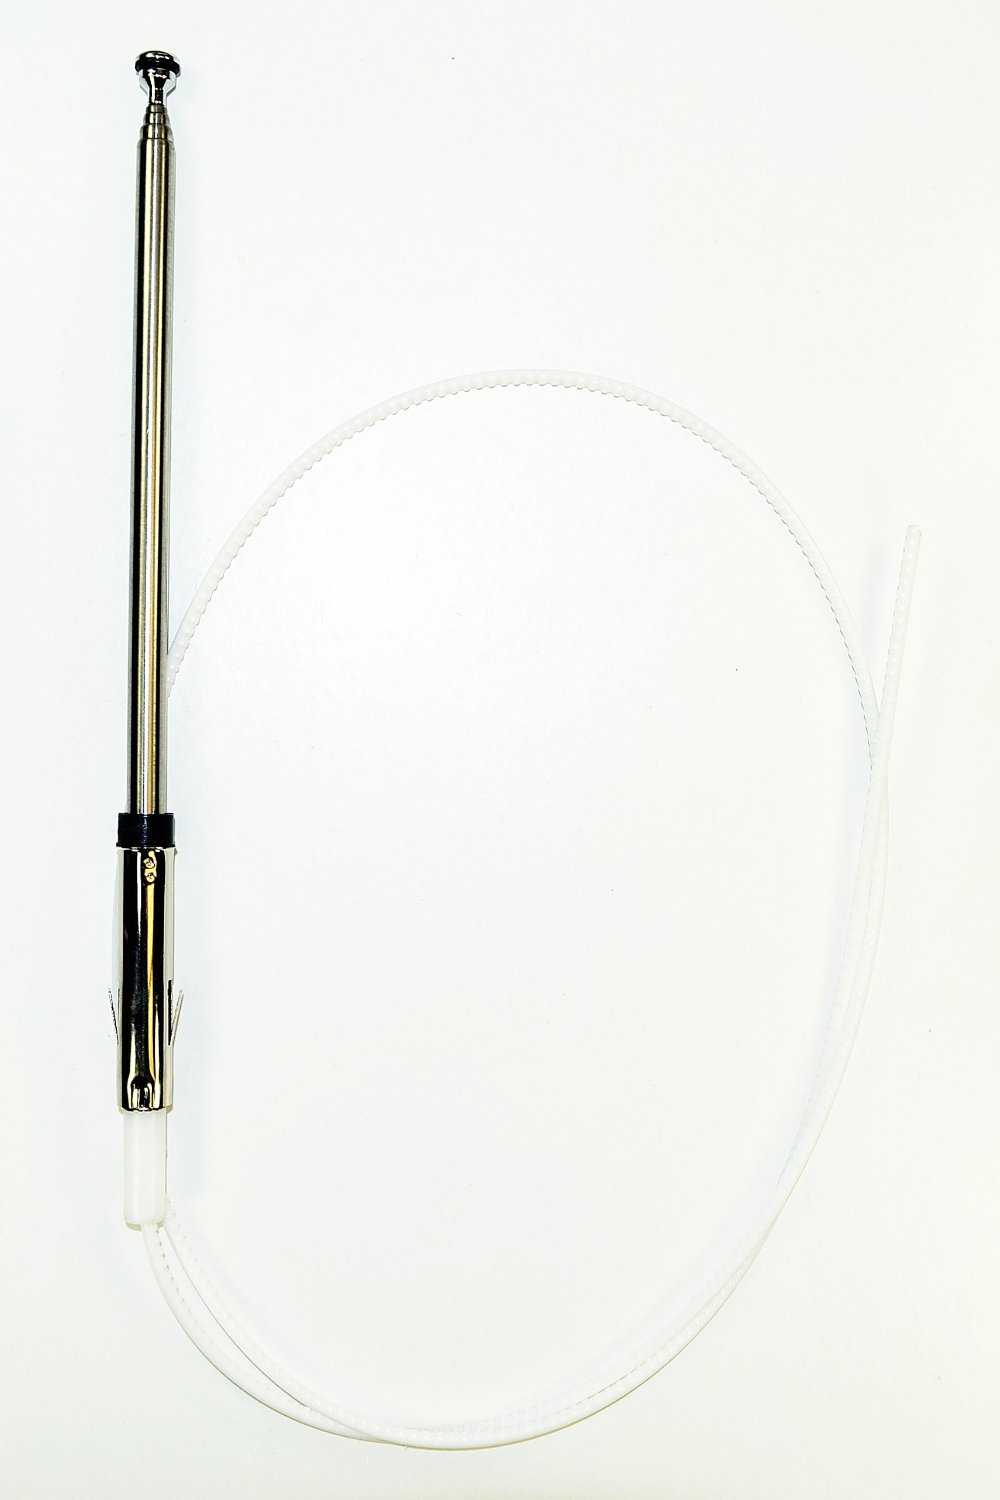 Acura Legend Power Antenna Mast (1993-1995) - Part Number 39152-SP0-A04